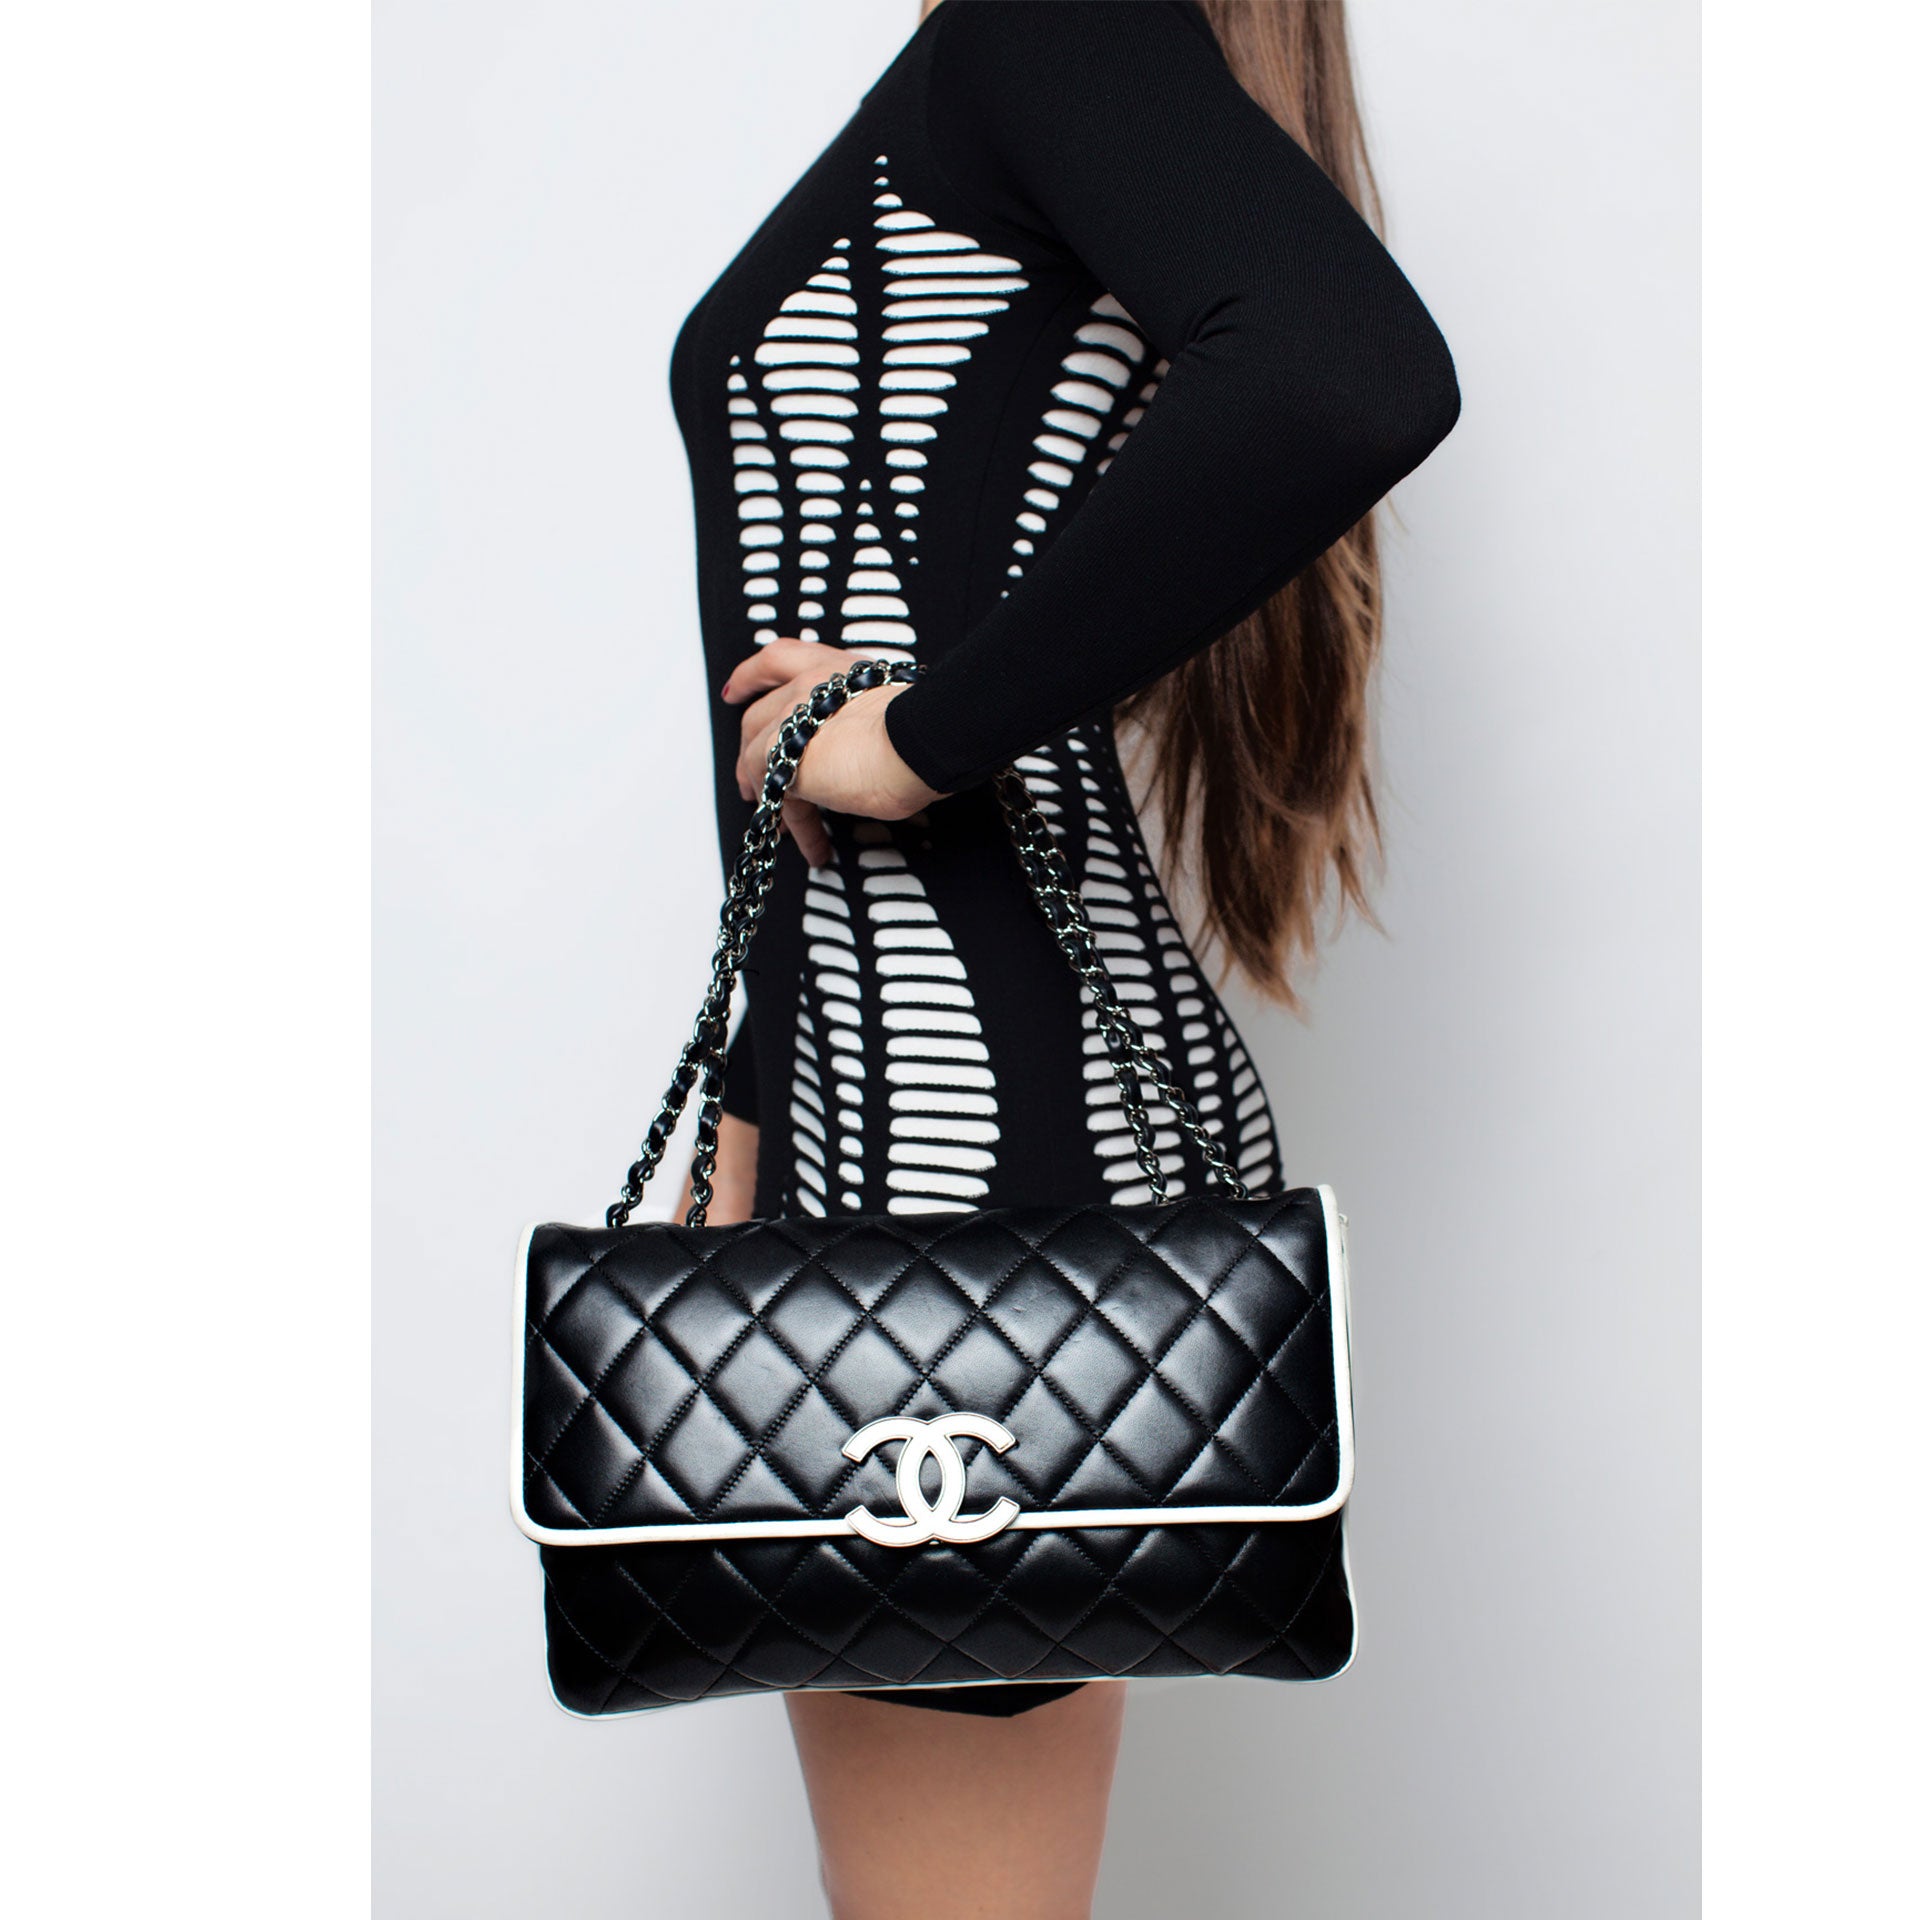 Discover the CHANEL Lambskin & Gold Metal Black & White Cruise